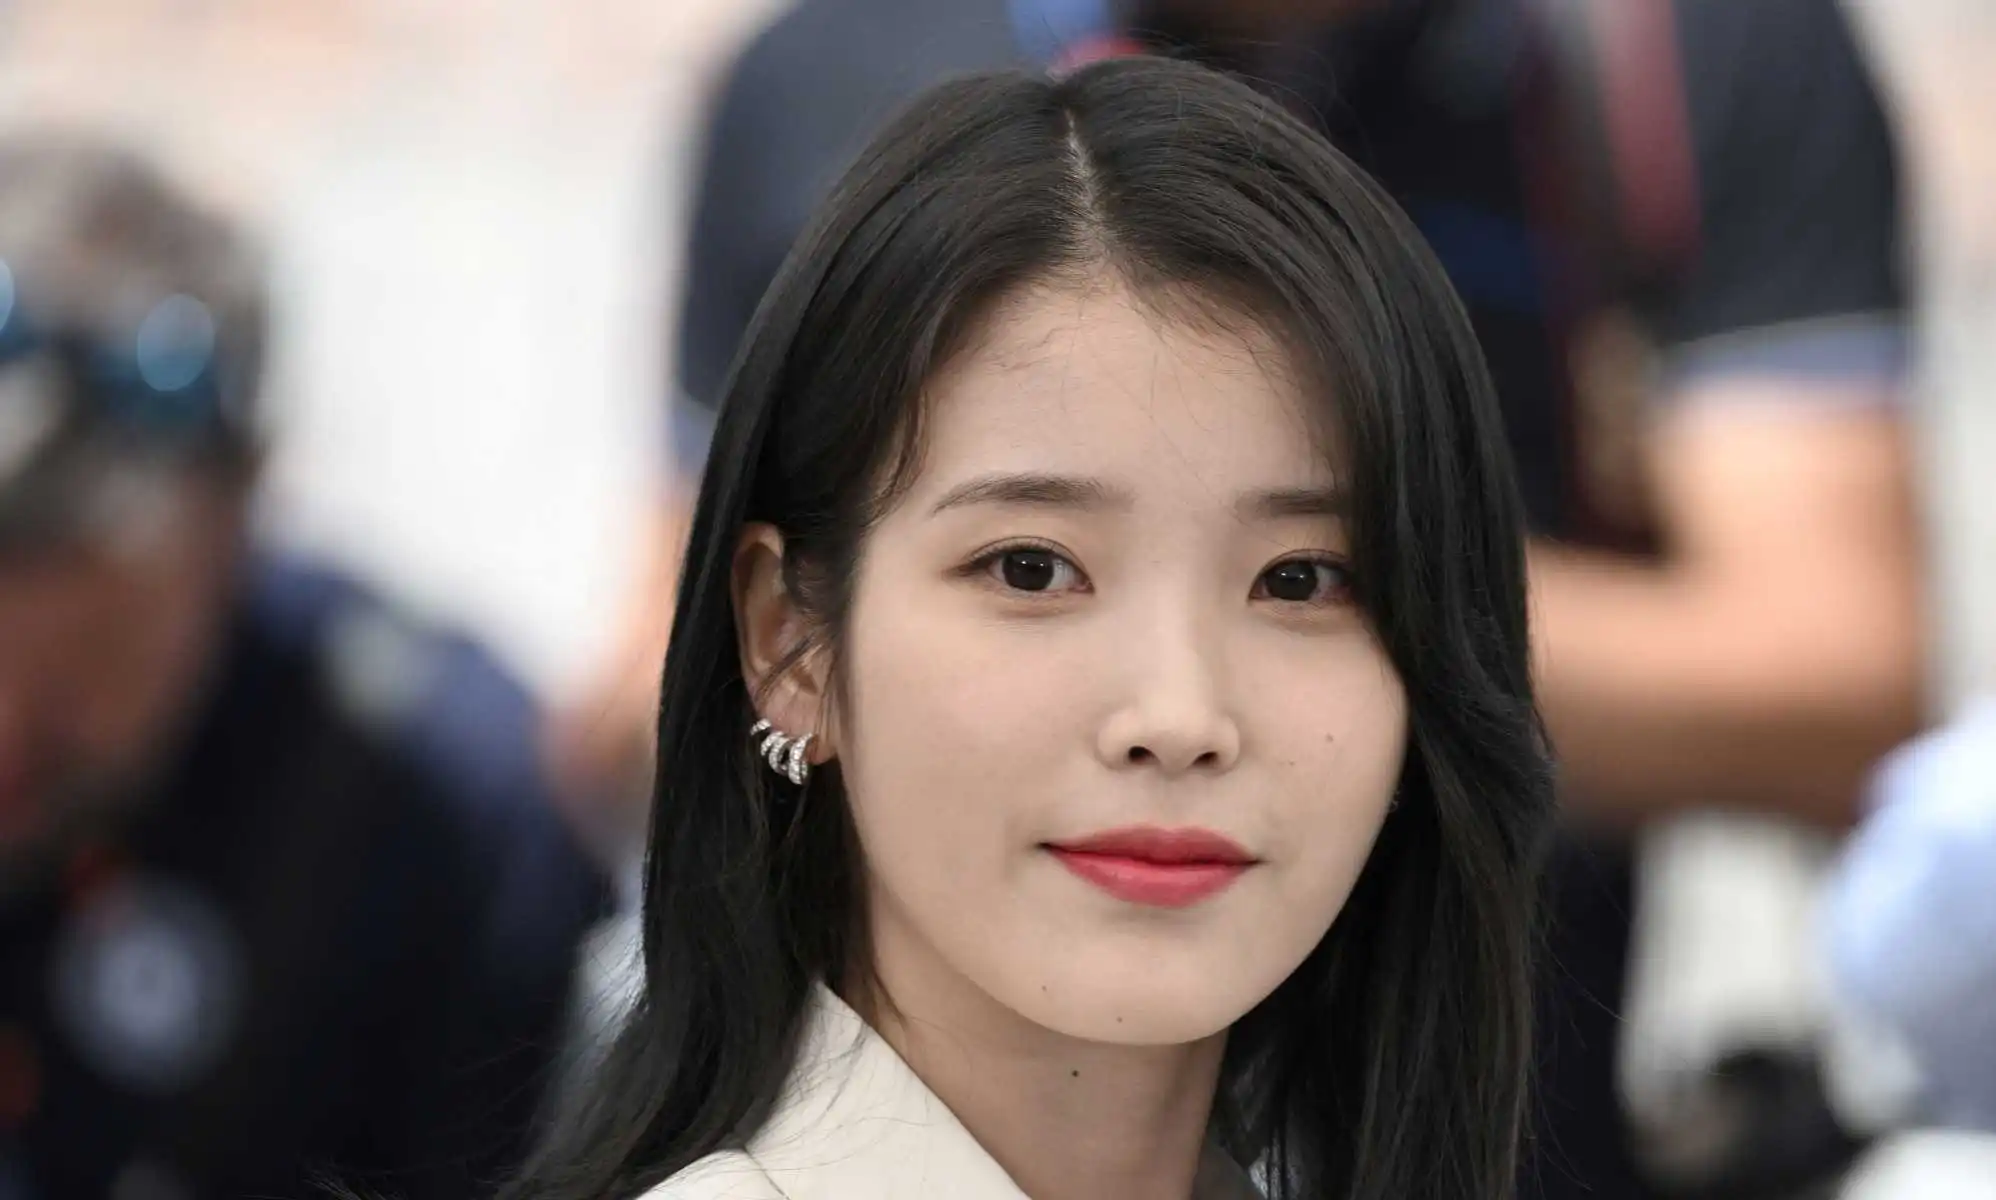 K-pop star IU changes name of track after queerbaiting backlash